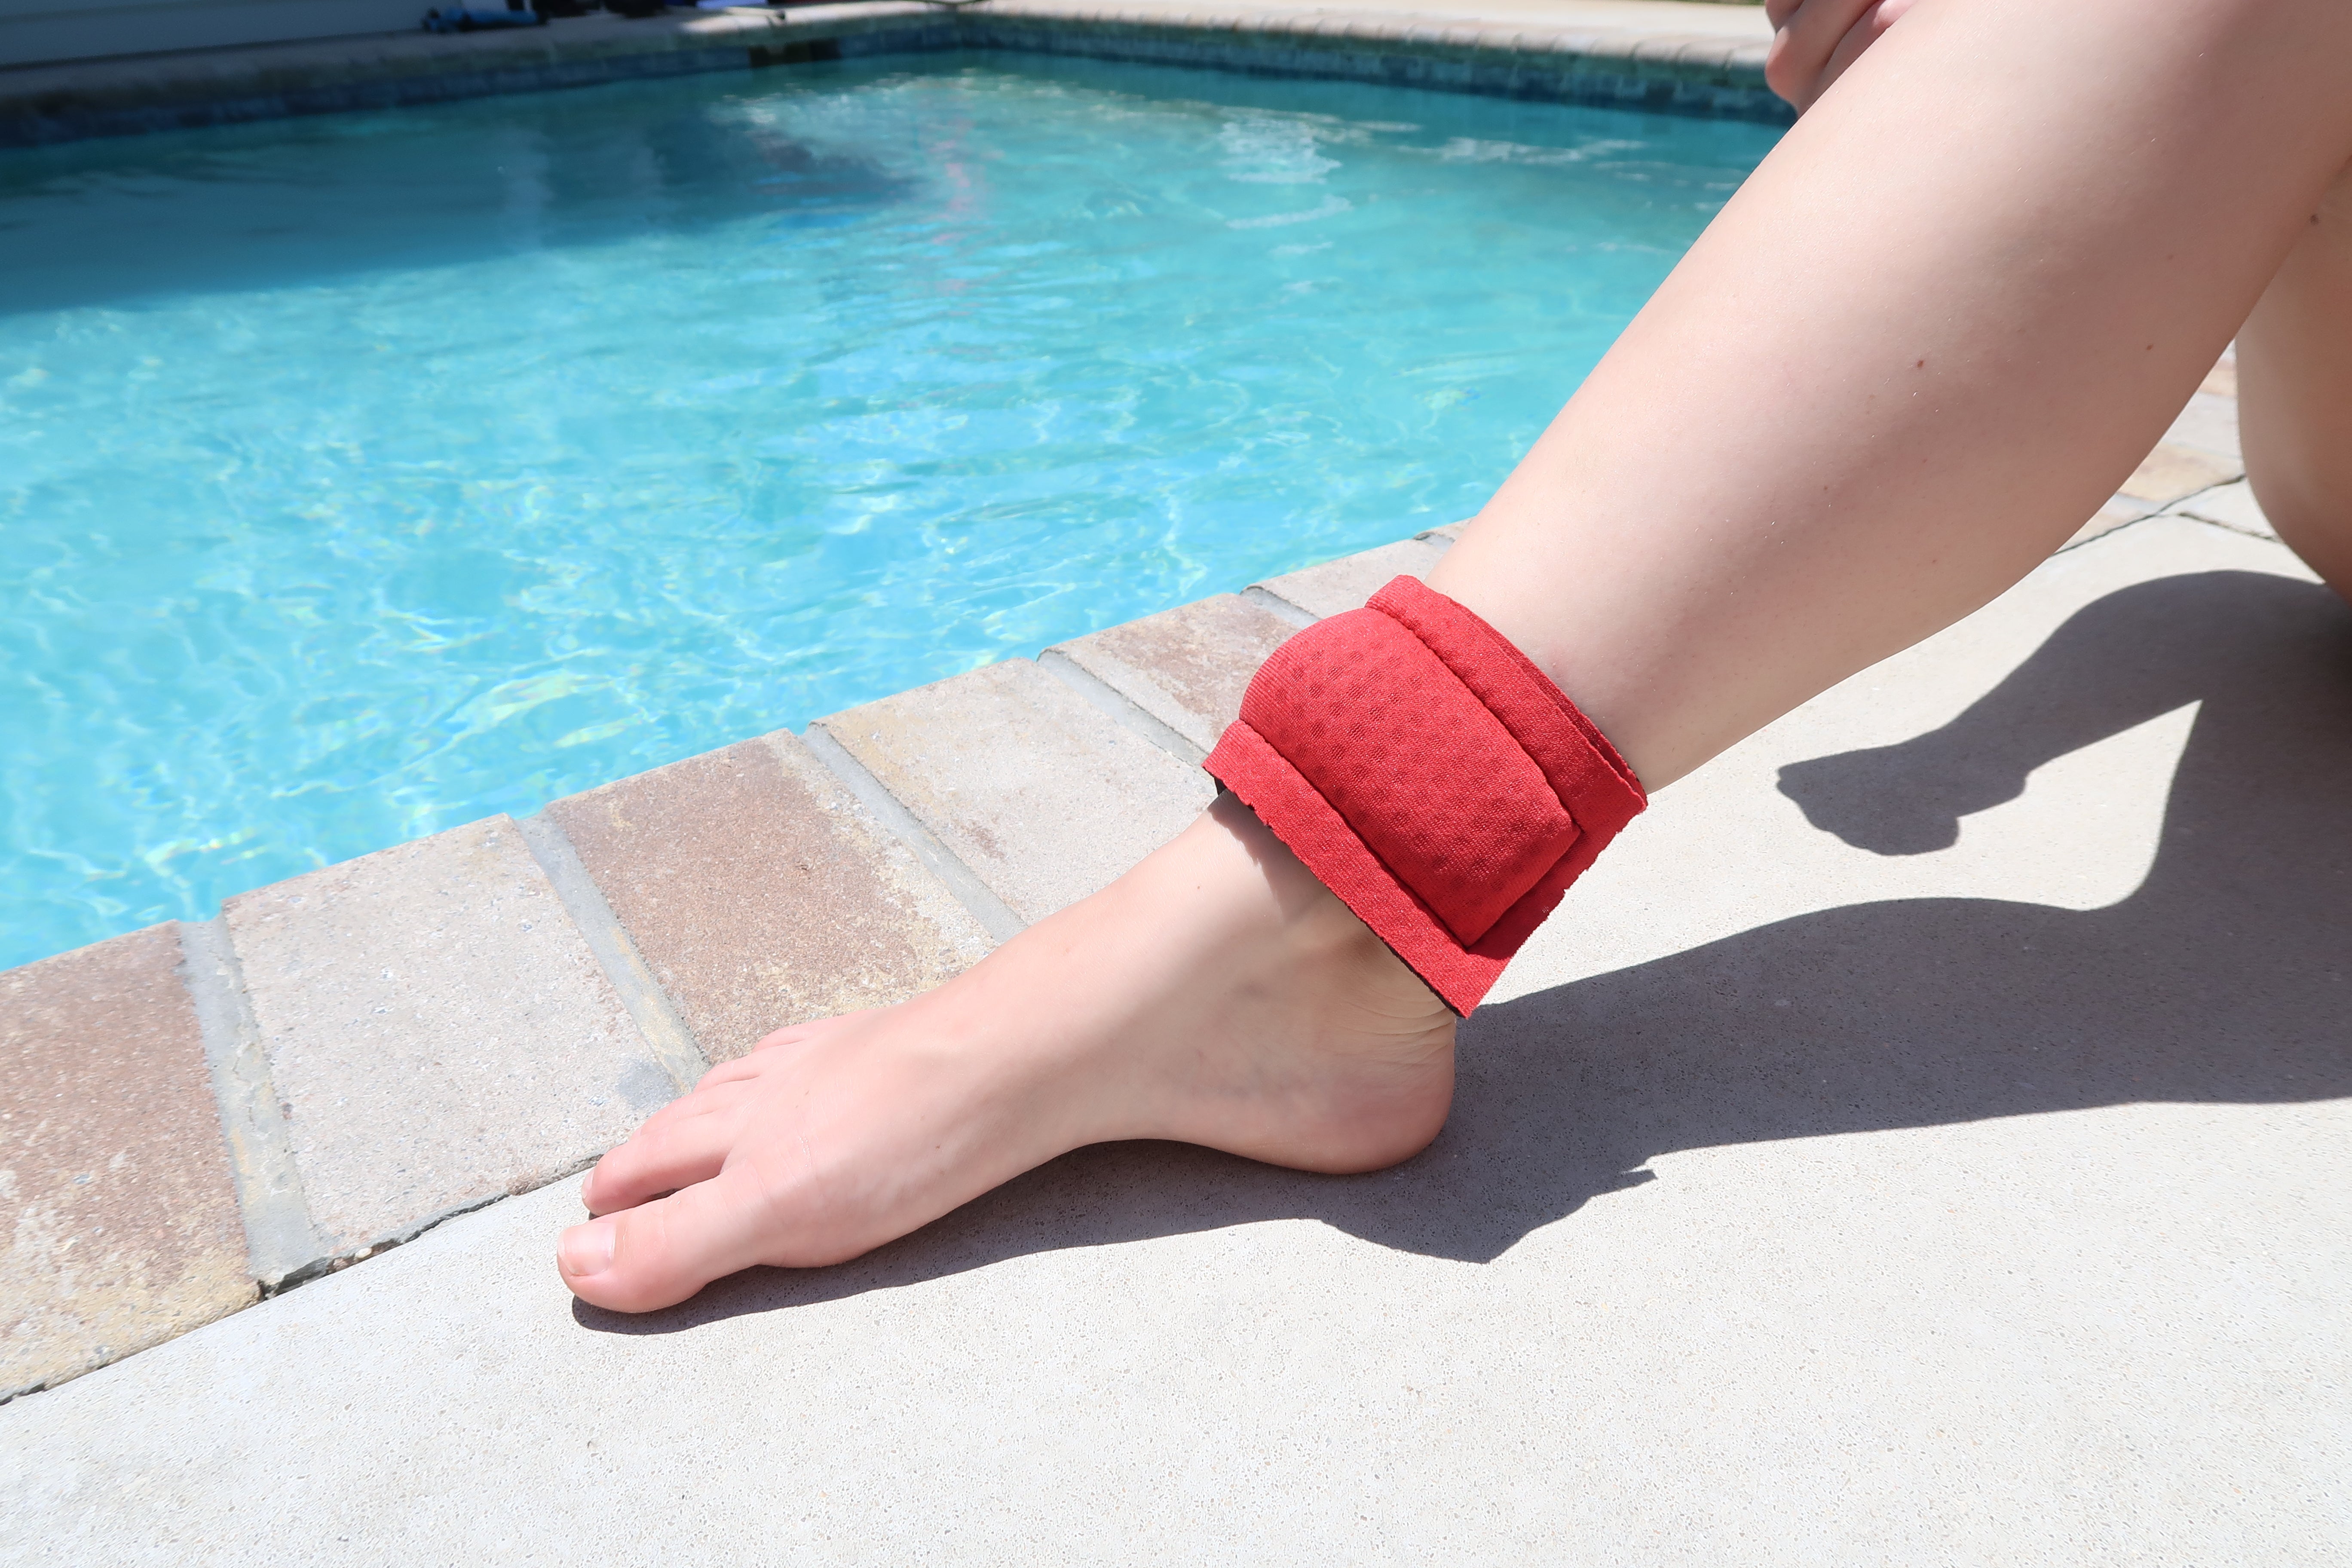 How to Make DIY Wrist and Ankle Weights